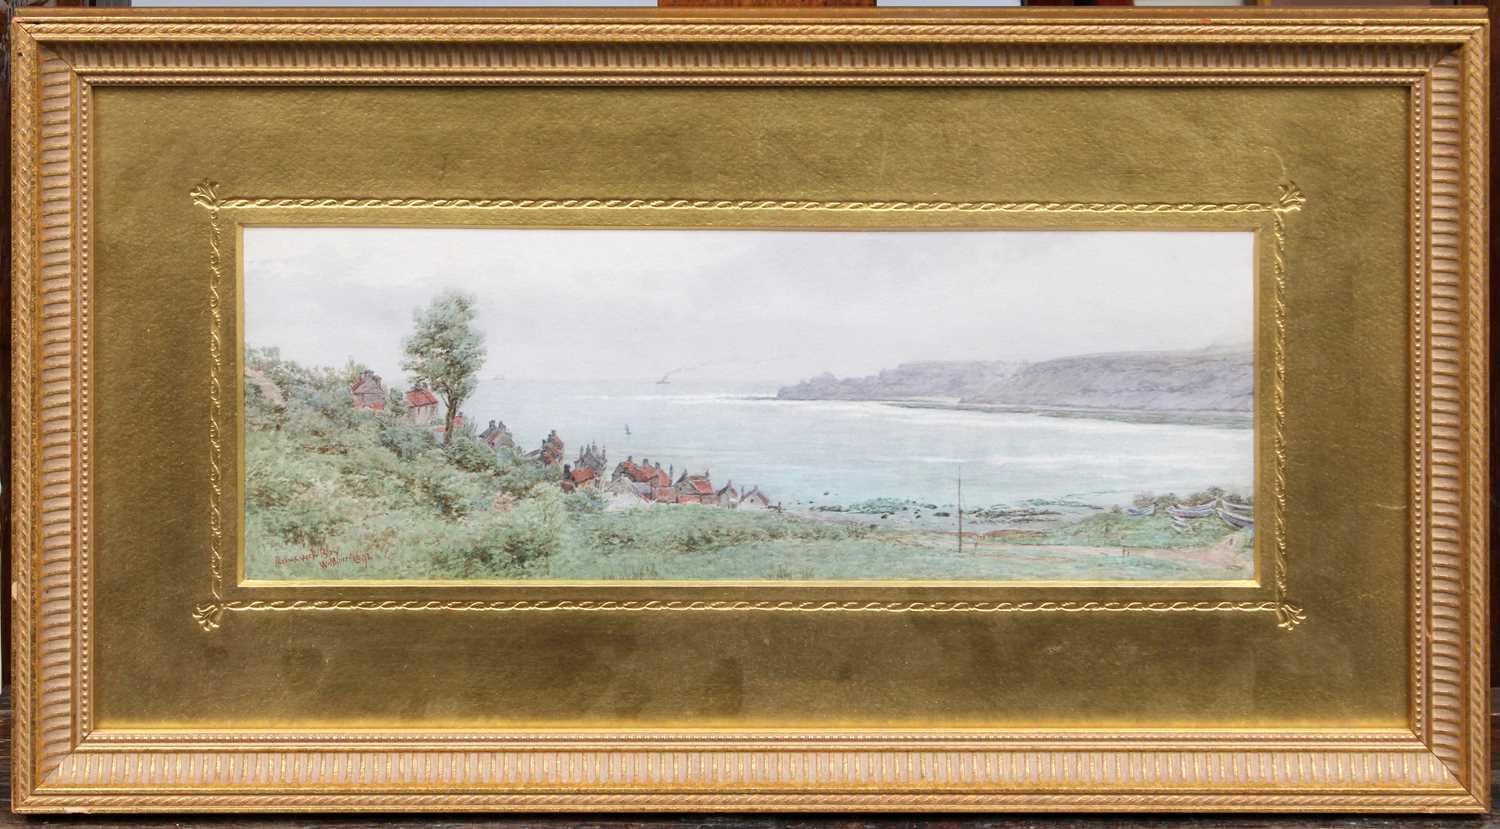 Attributed to William Moore Jnr (1817-1909) "Runswick Bay" Signed, inscribed and dated 1892, - Image 2 of 2